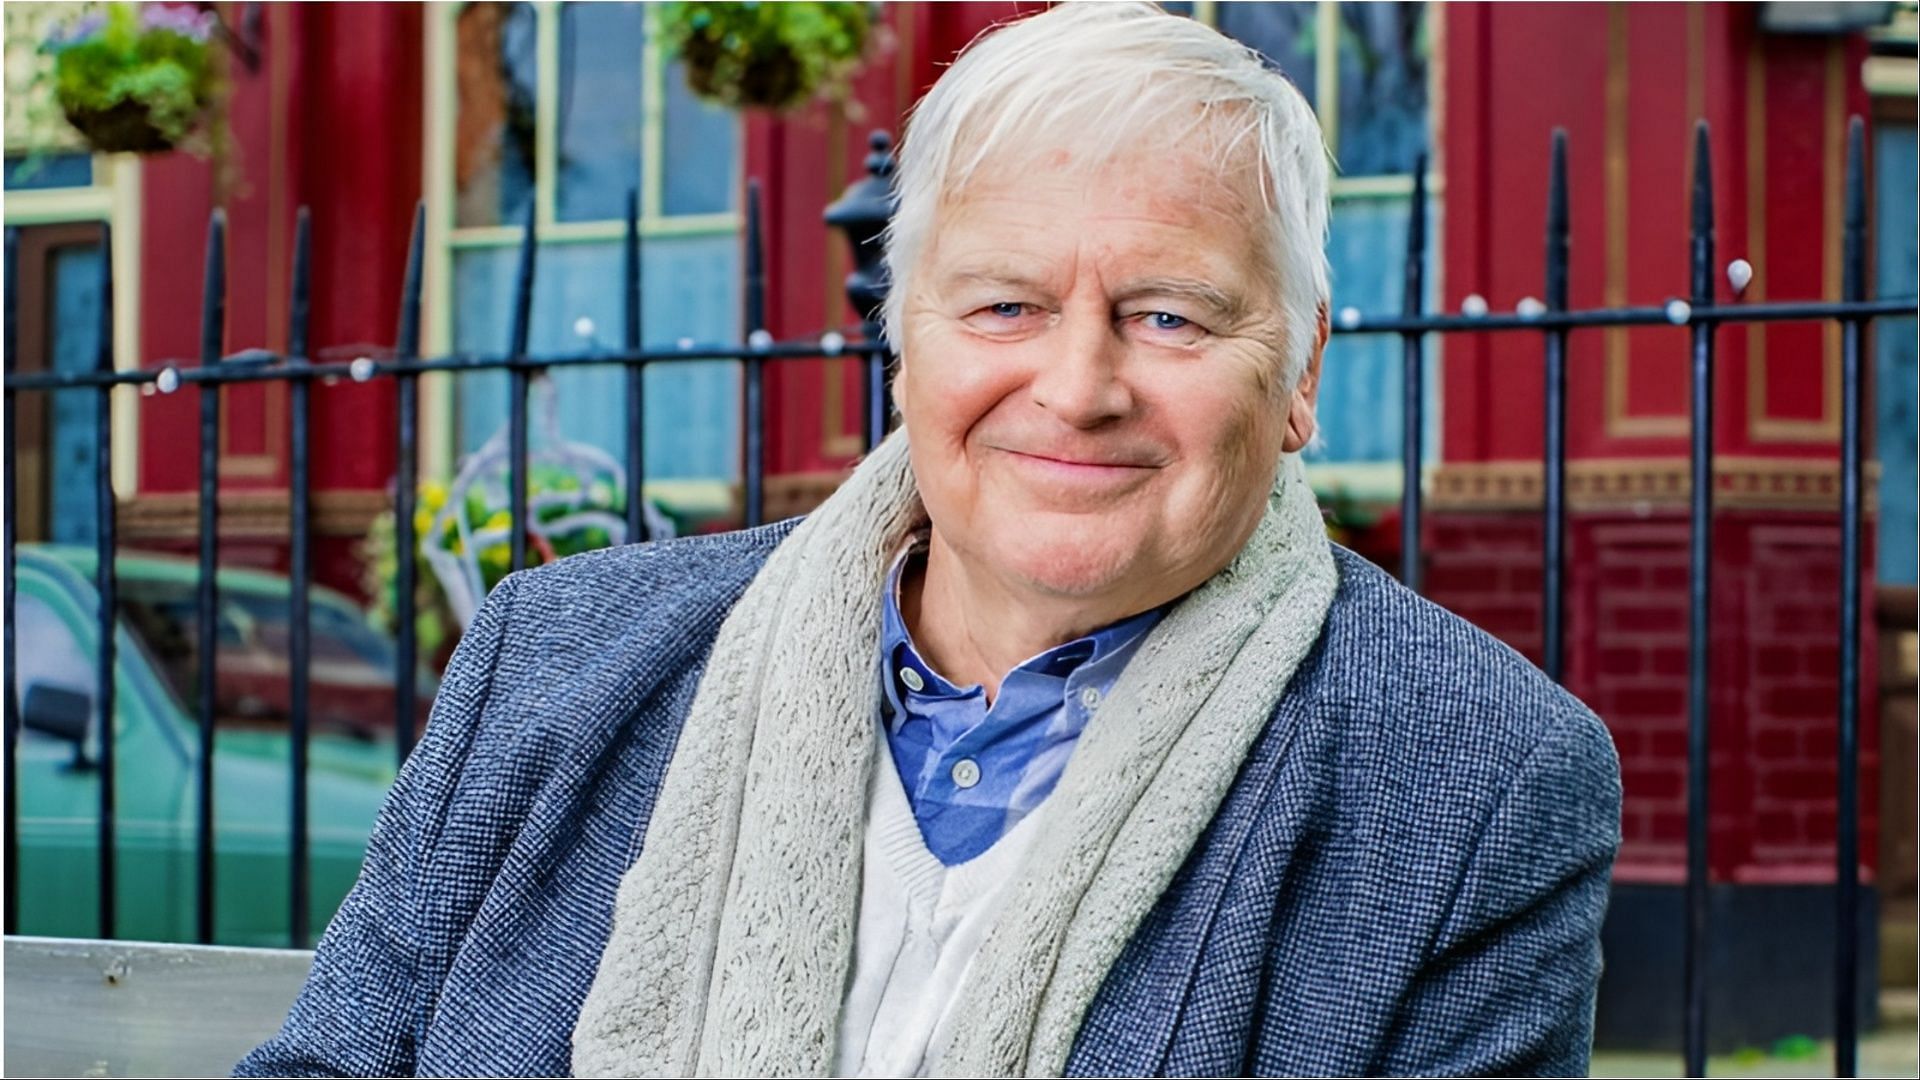 Ian Lavender has unexpectedly died at the age of 77 (Image via BBC EastEnders/Facebook)